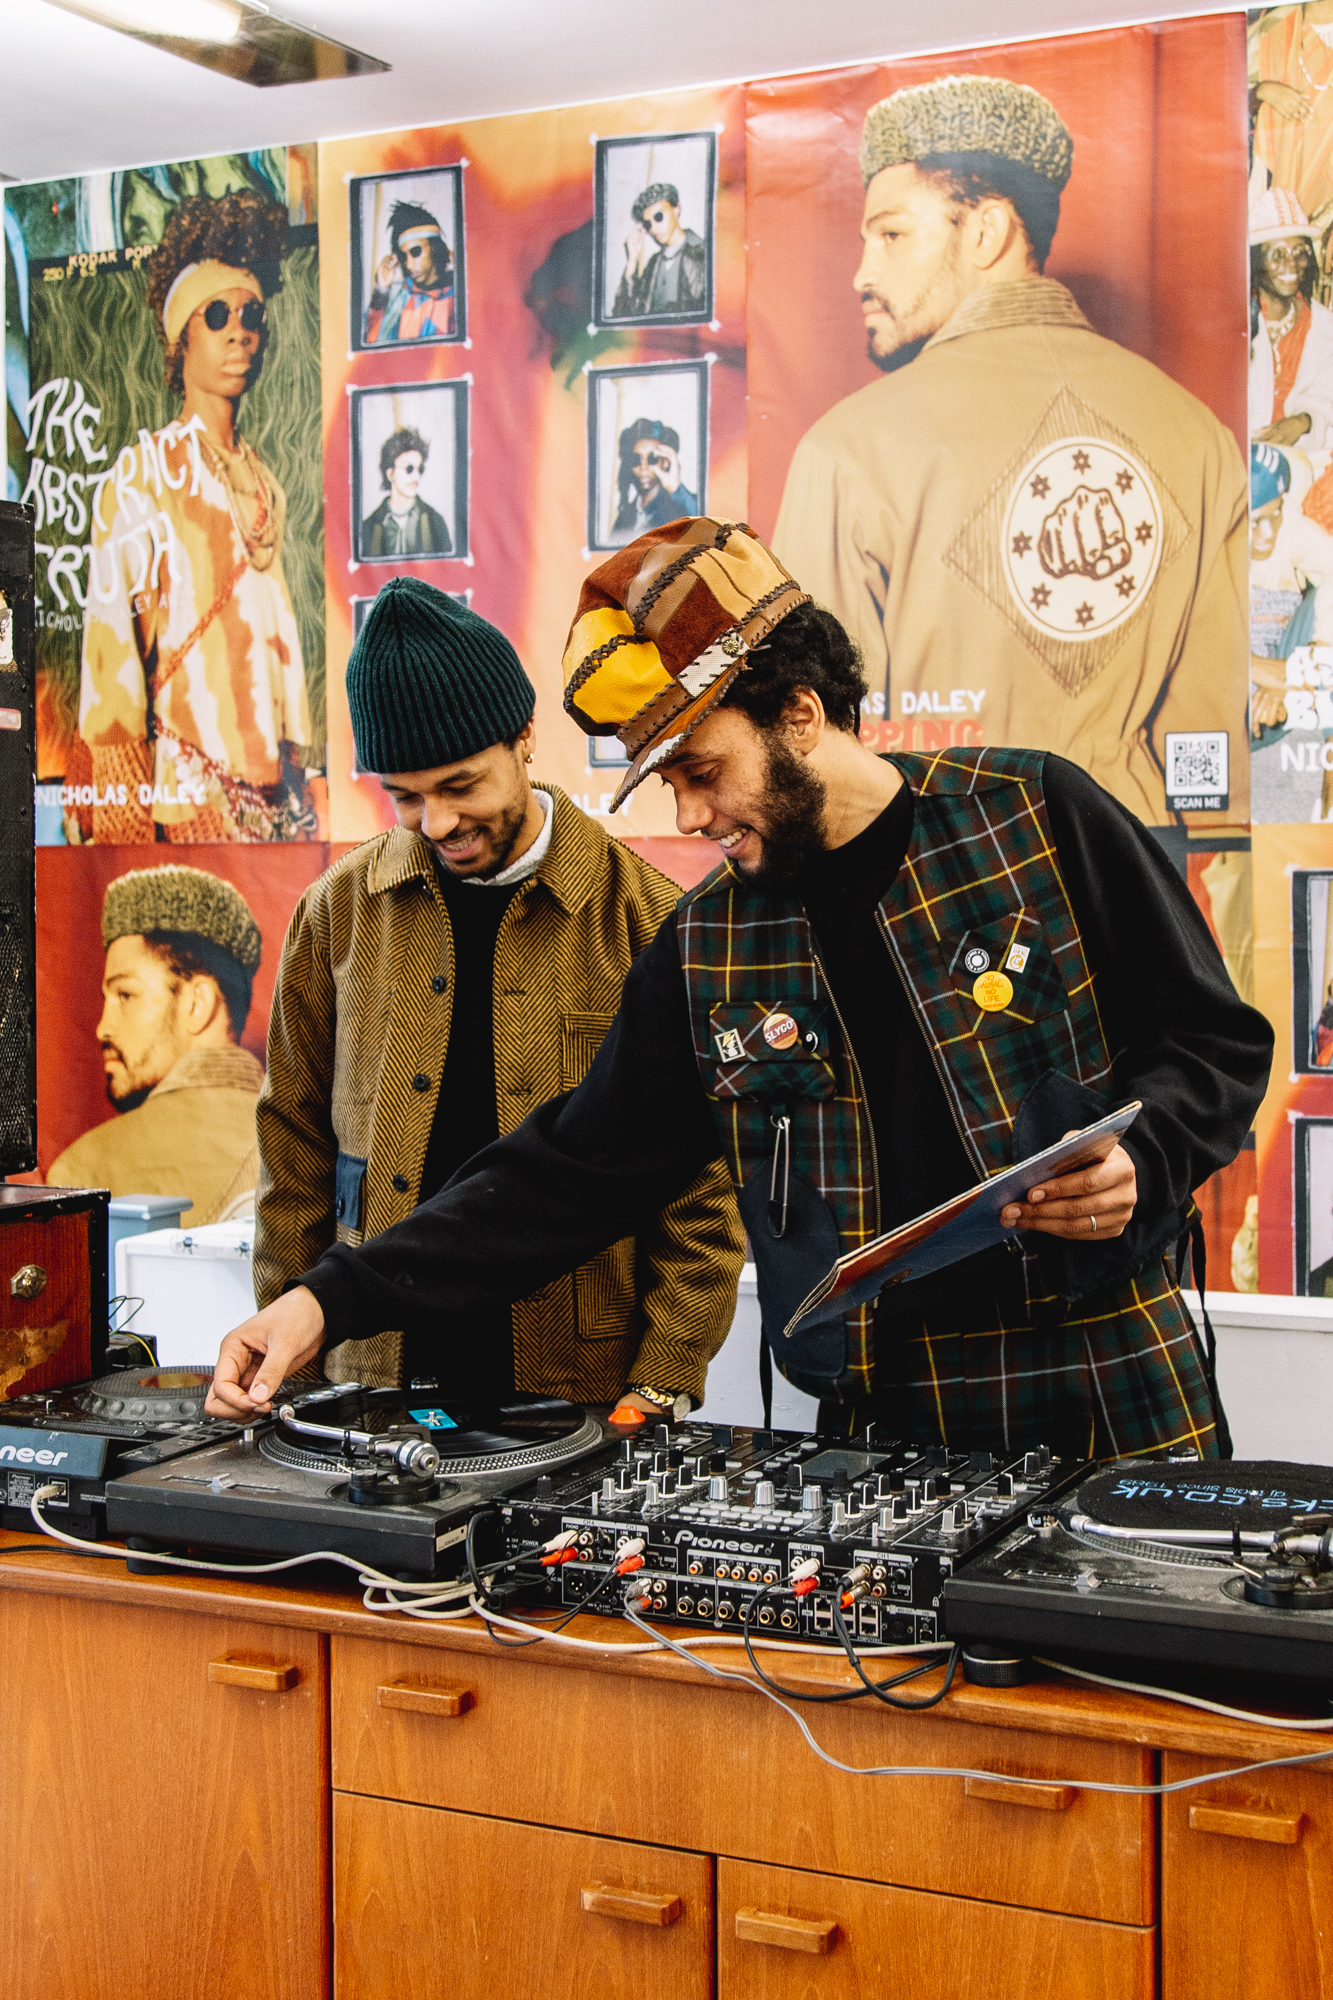 Over the course of two weeks, Nicholas Daley's space became a hub of community, music, and style, making London’s Soho neighbourhood all the more vibrant. 